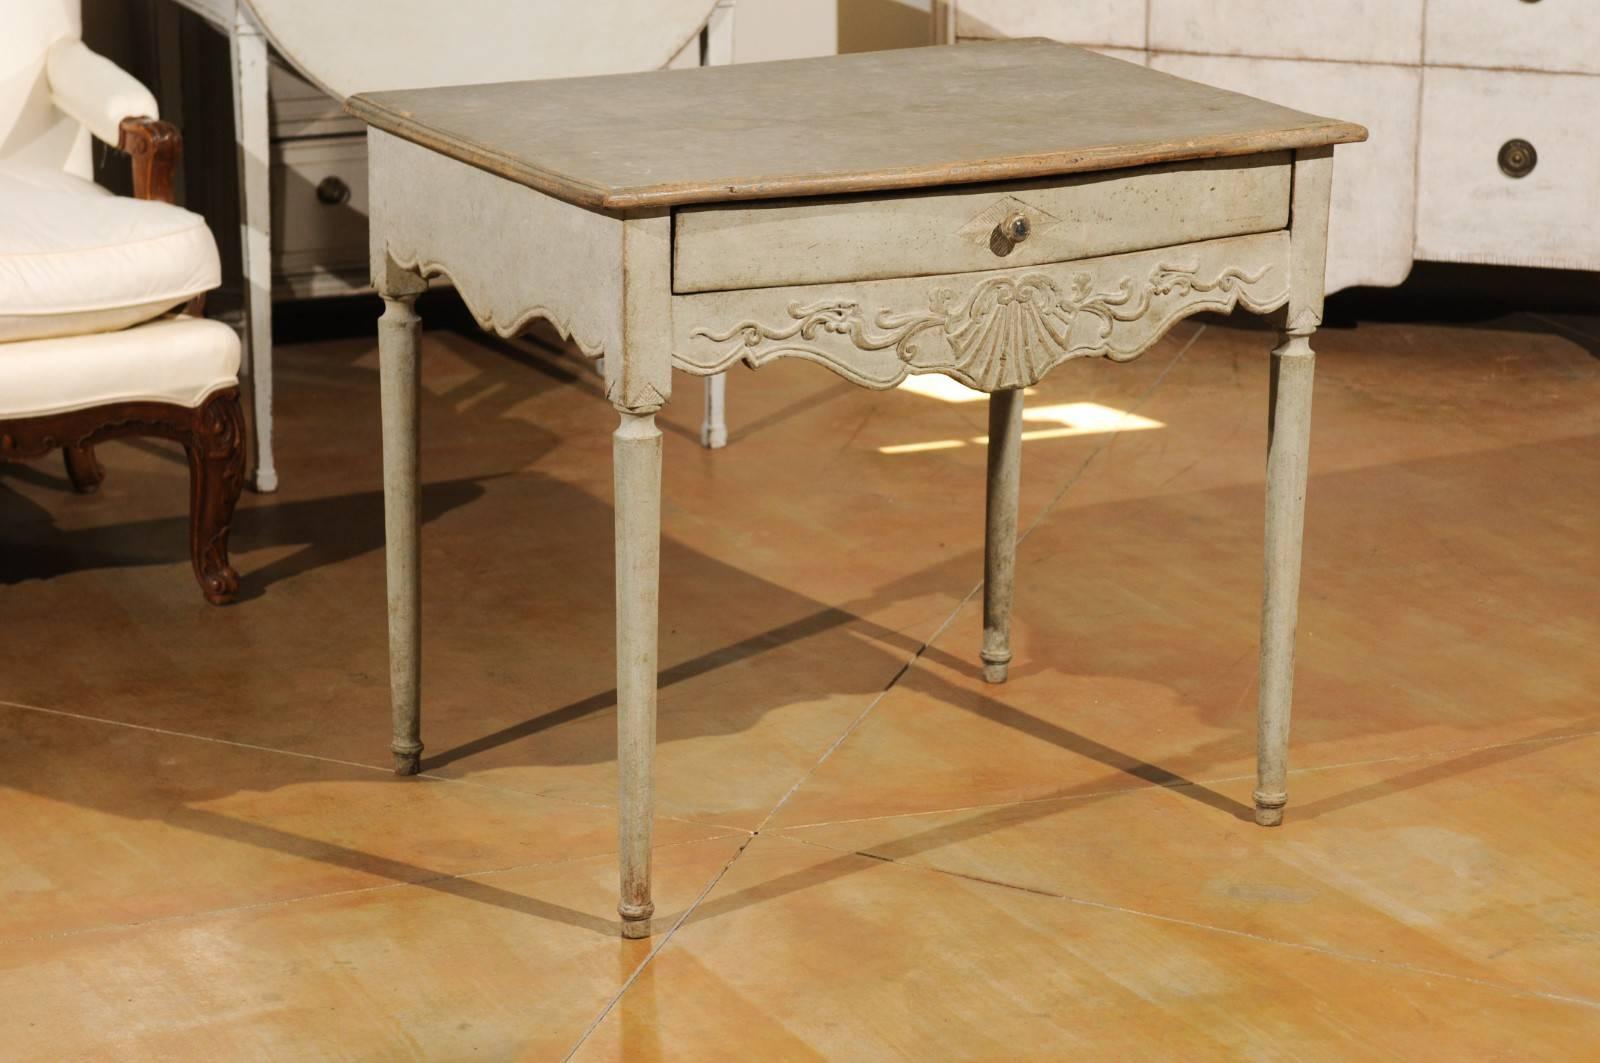 19th Century Swedish 1810s Period Gustavian Painted Side Table with Drawer and Carved Apron